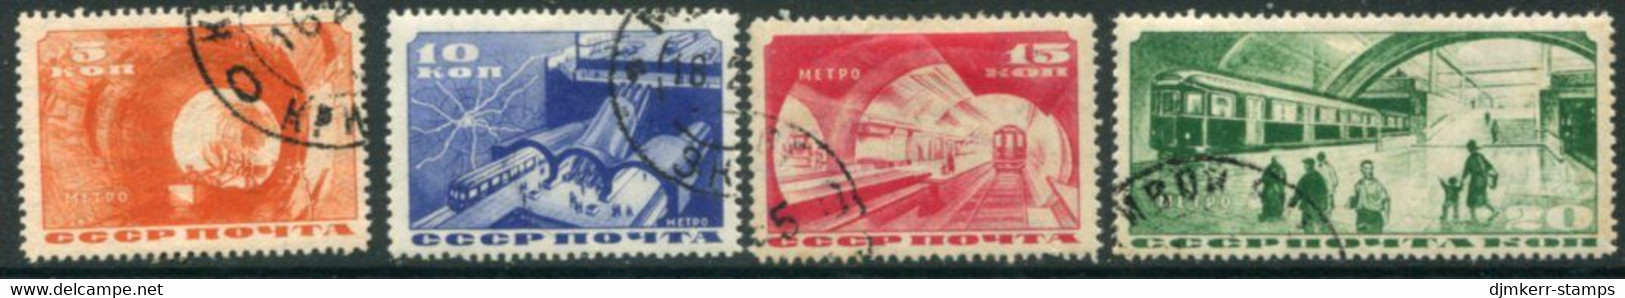 SOVIET UNION 1935 Opening Of Moscow Metro Set, Fine Used.  Michel 509-12 - Oblitérés